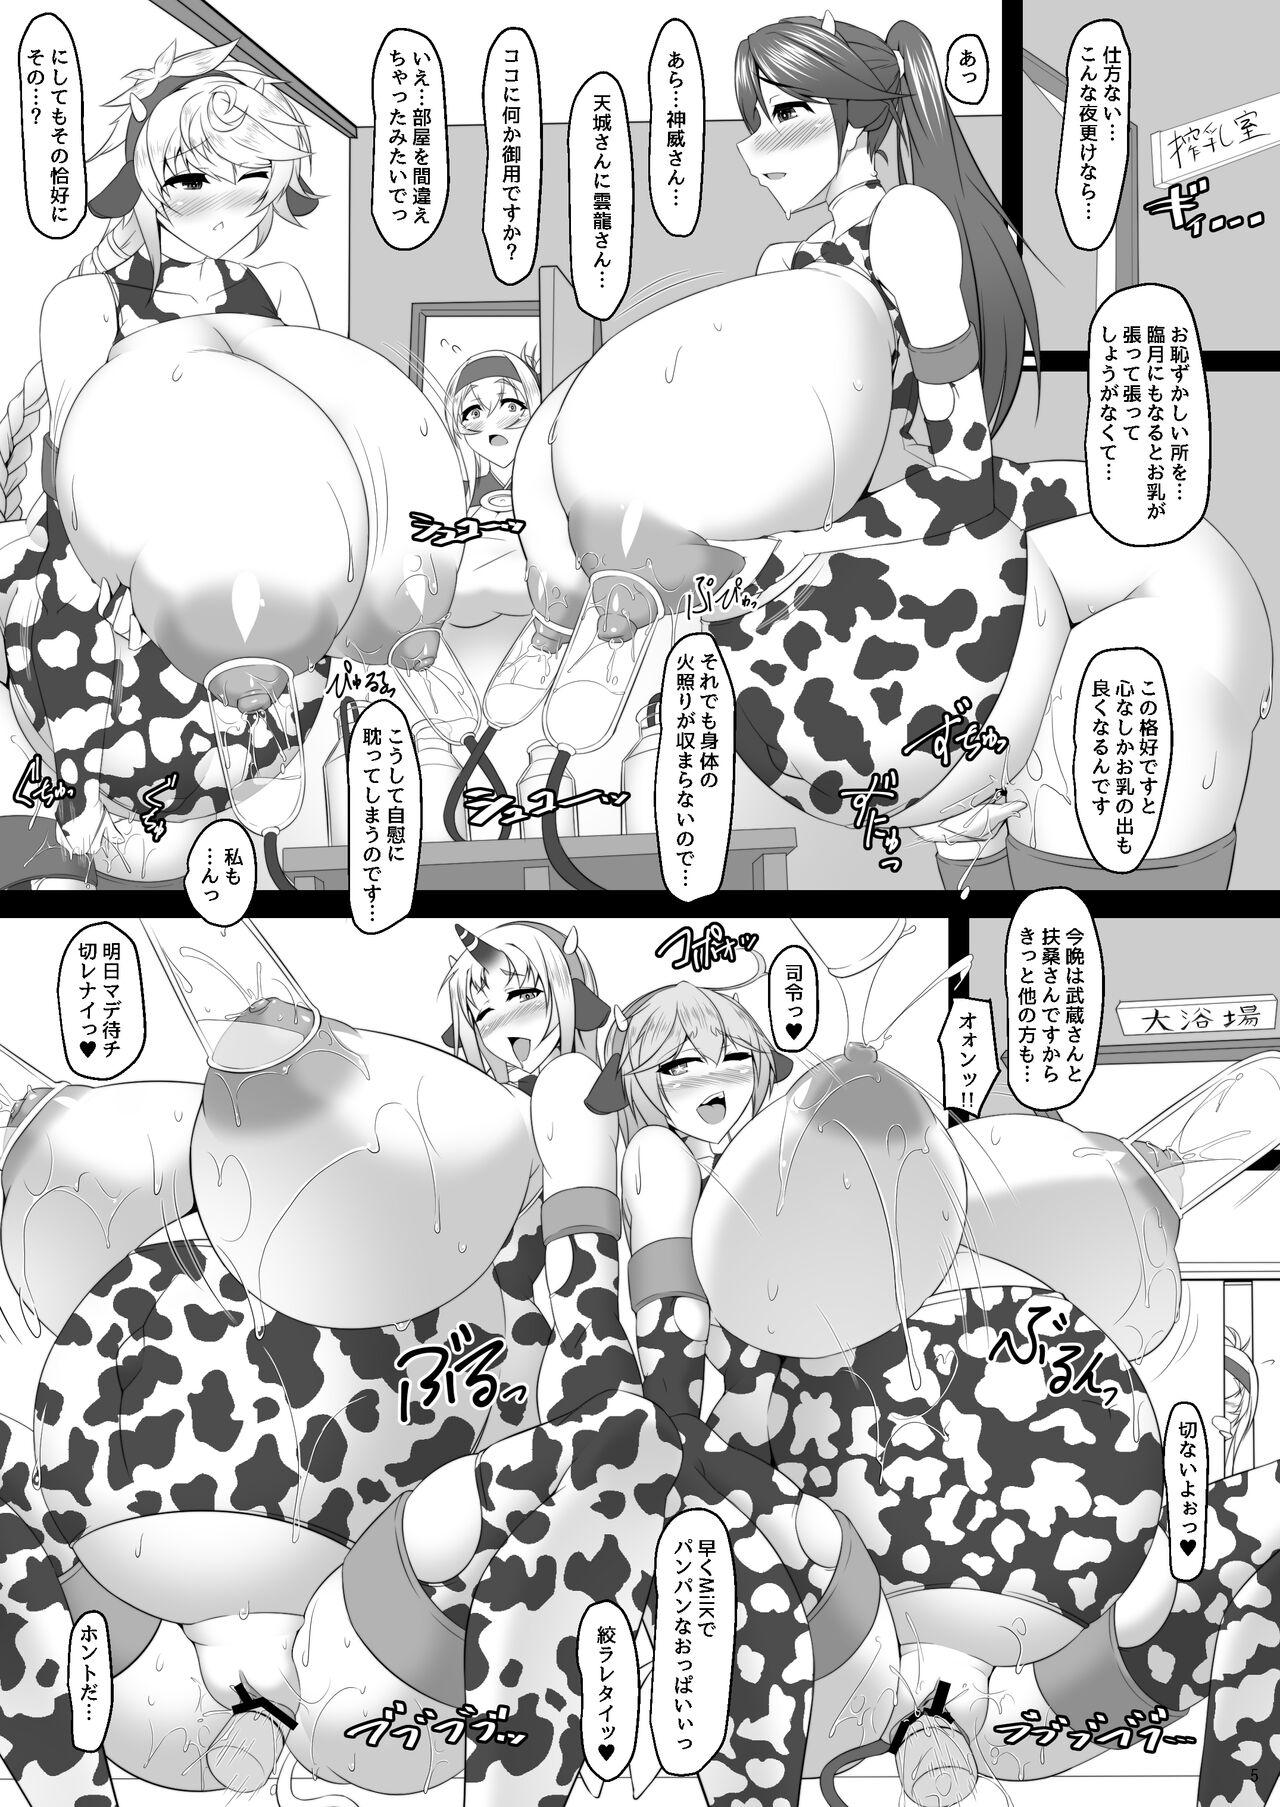 Abuse Bote Colle 6 - Kantai collection Staxxx - Page 5